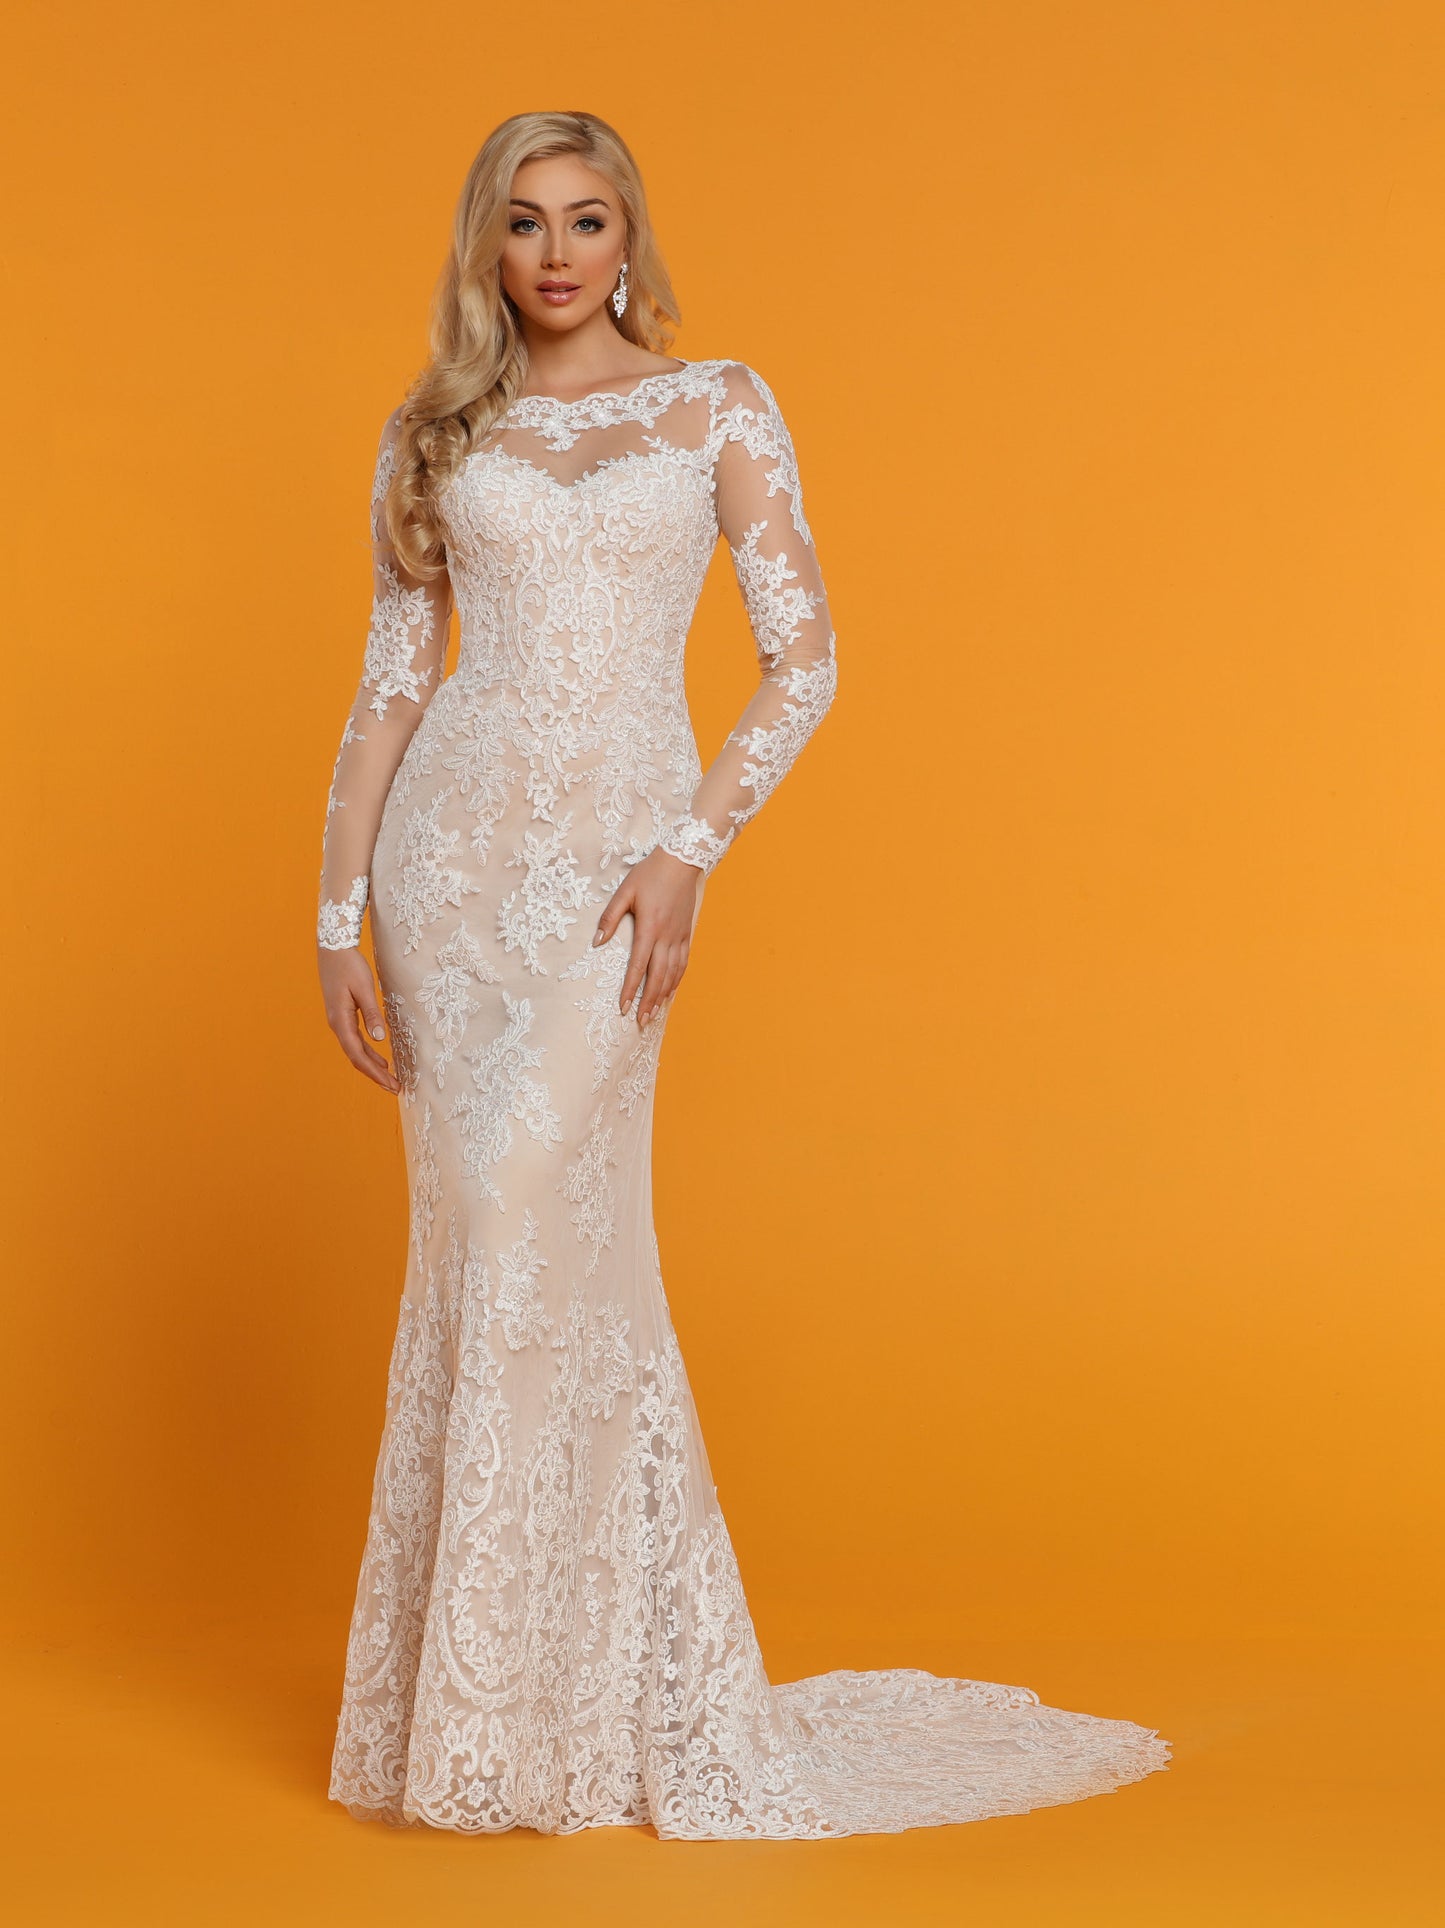 Davinci Bridal 50516 is a Fit & Flare Mermaid Wedding Dress. Featuring a sheer tulle & Lace Illusion Neckline back with scallop lace keyhole cut outs in the back with buttons lining the back seam. Sheer lace long sleeves.  Available for 1-2 Week Delivery!!!  Available Sizes: 2,4,6,8,10,12,14,16,18,20  Available Colors: Ivory/Nude, Ivory/Ivory